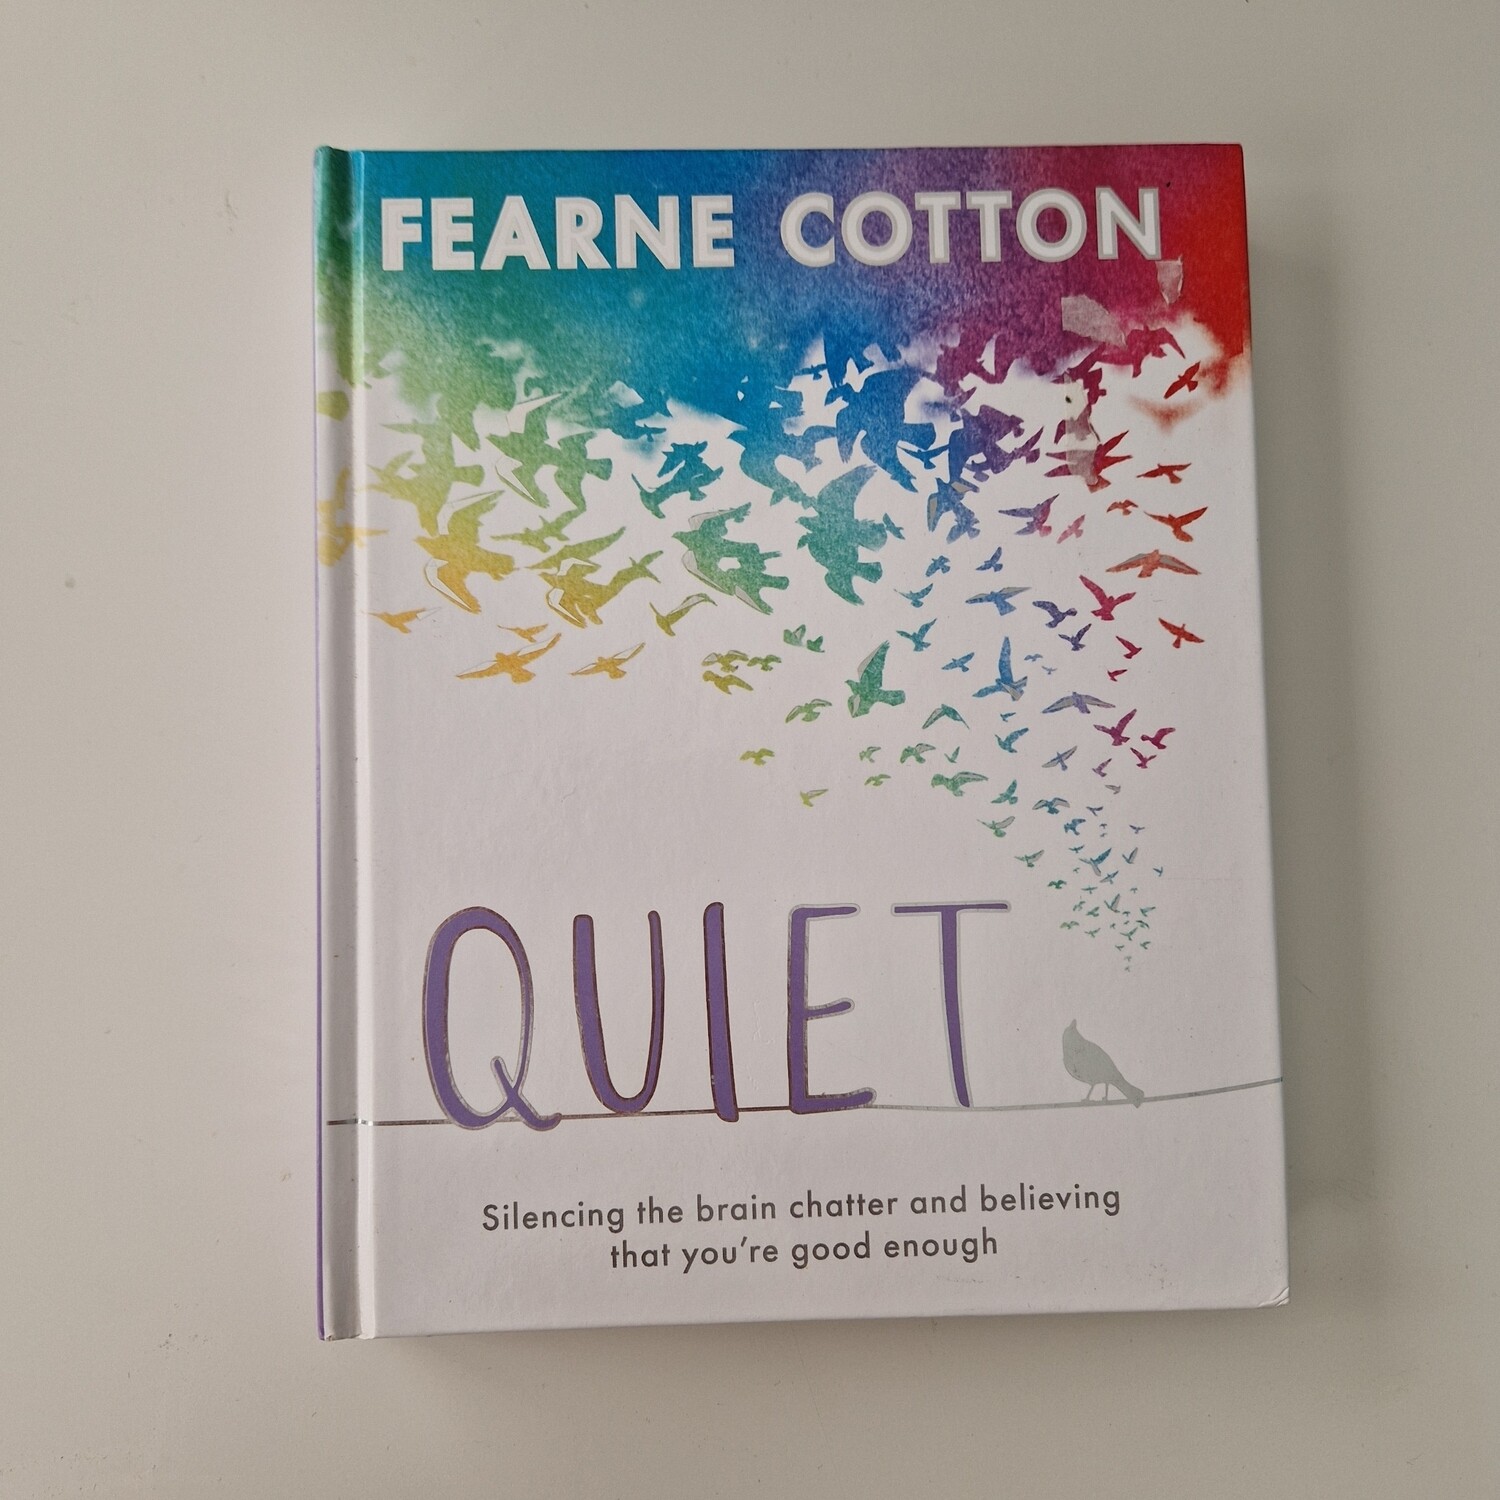 Quiet by Fearne Cotton